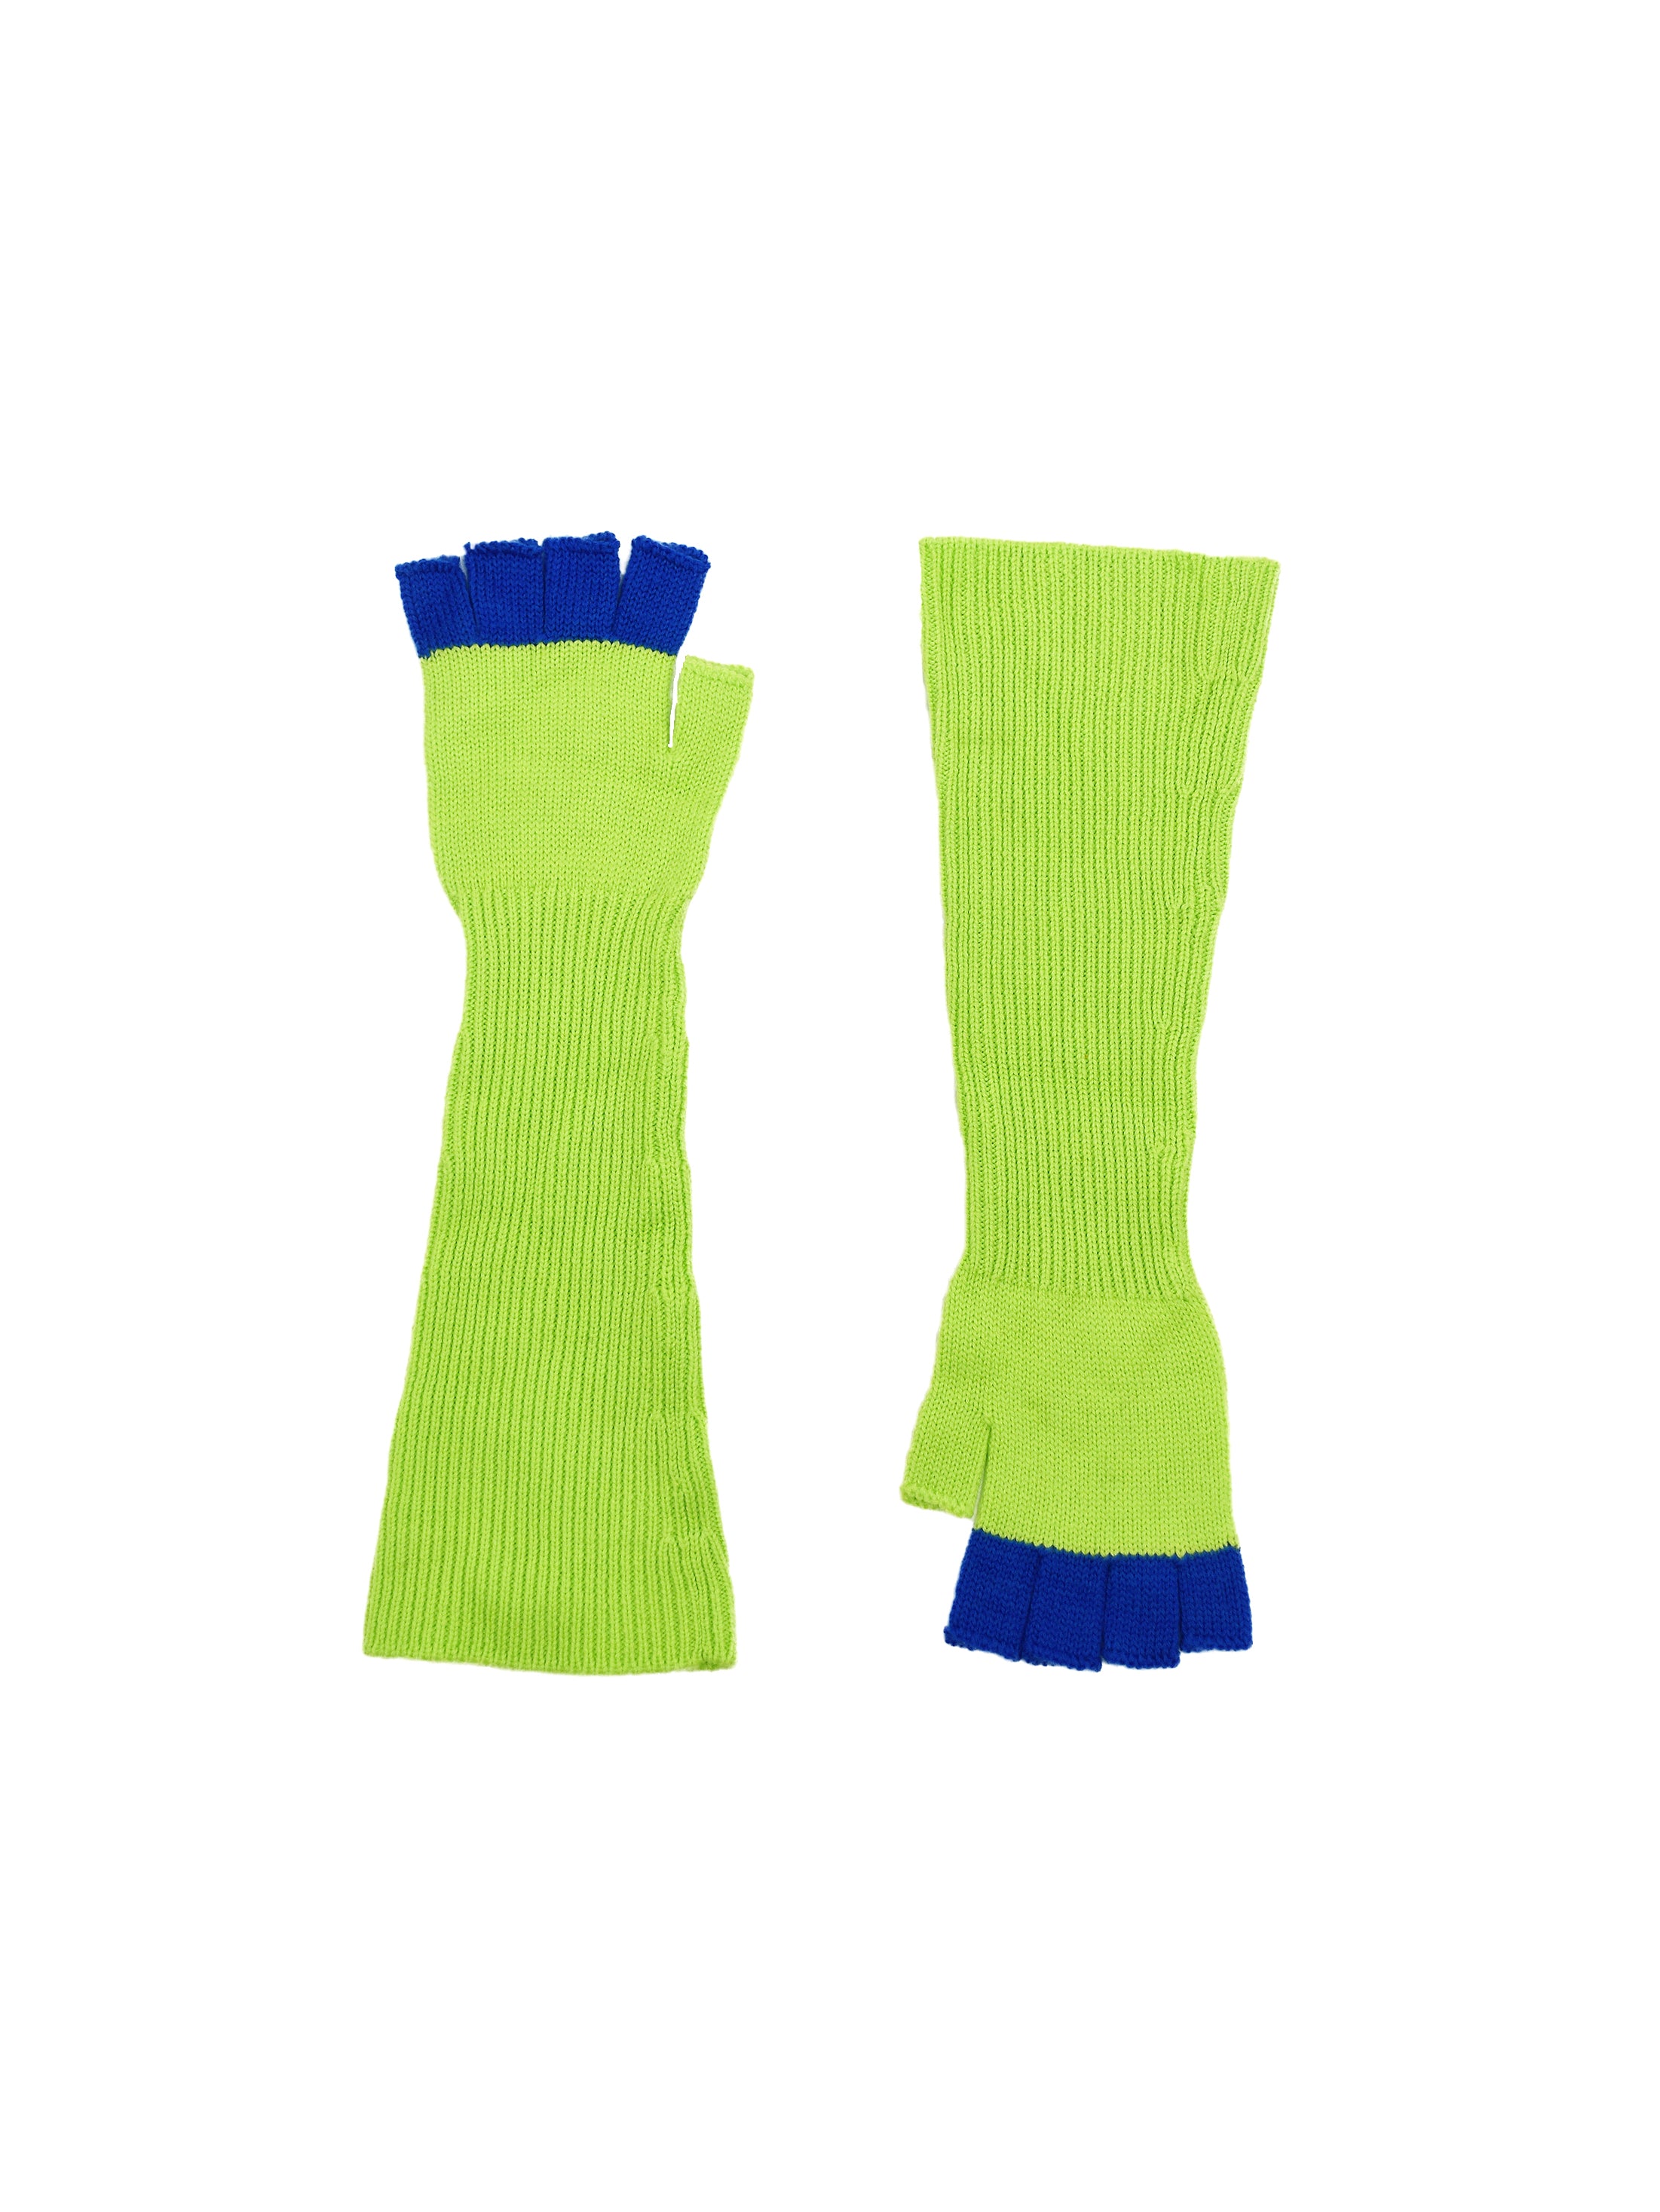 KNIT FINGERLESS GLOVES IN LIME AND BLUE